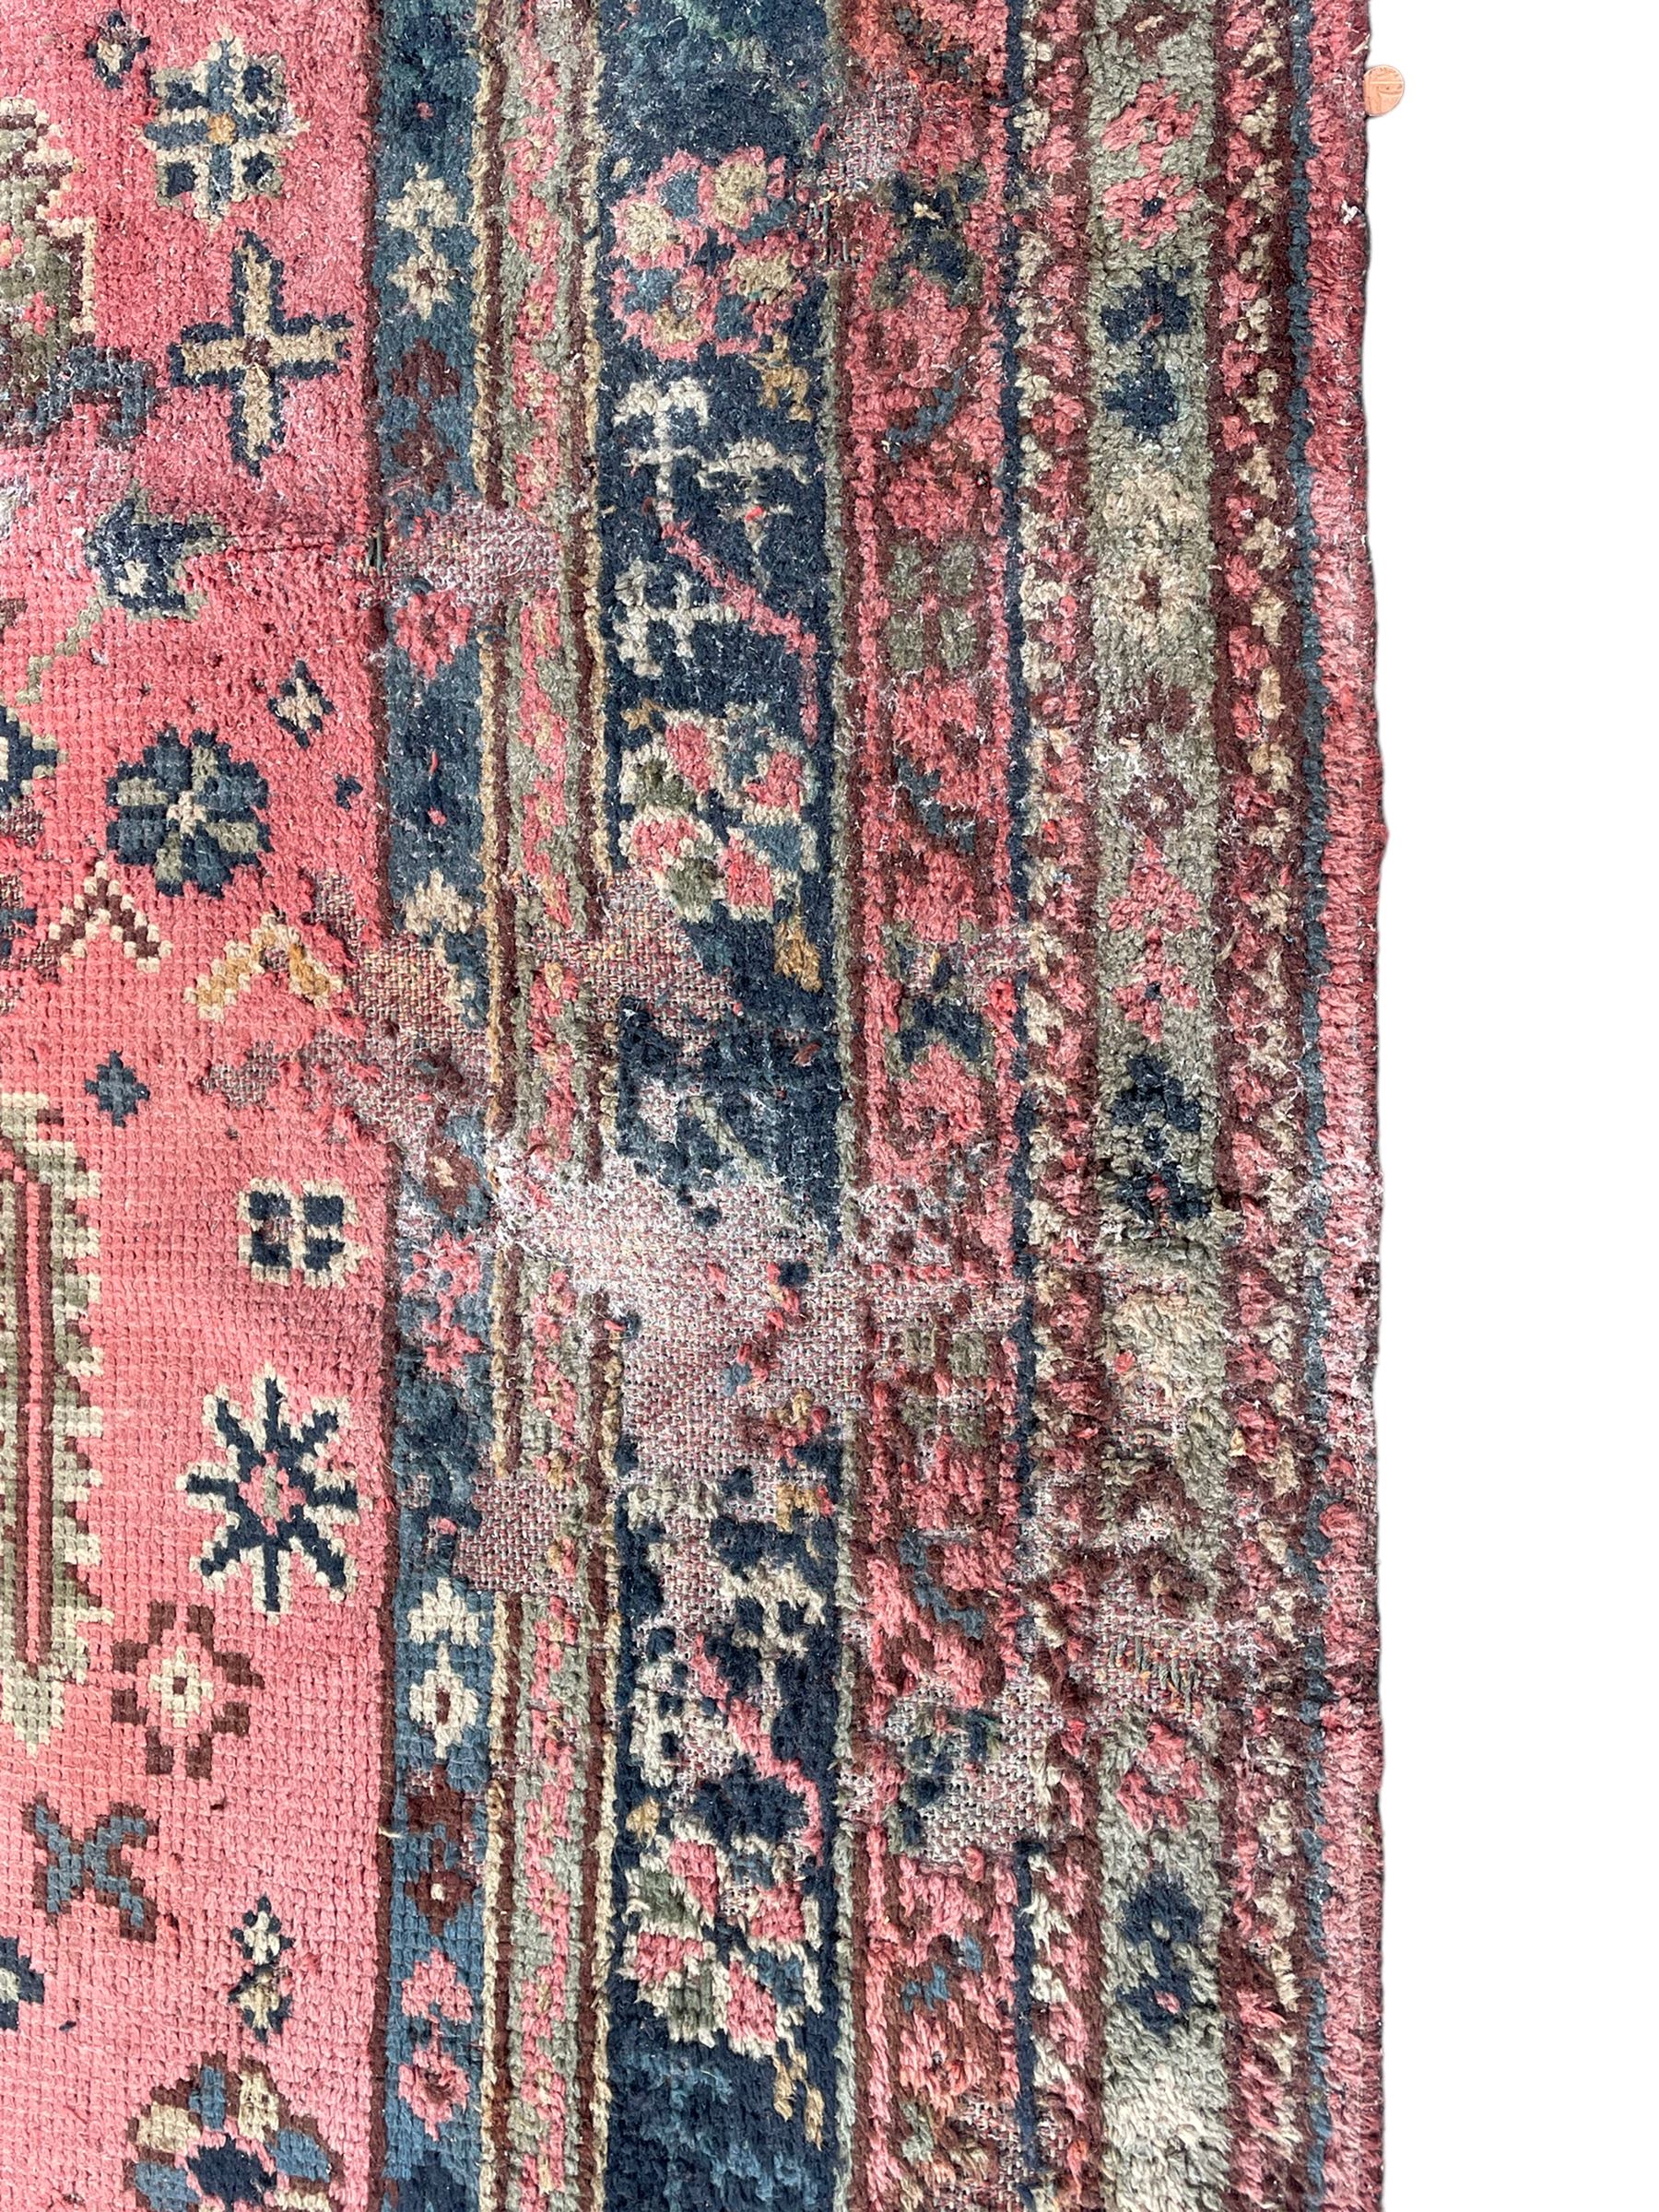 Large early 20th century Turkish red ground carpet - Image 6 of 13